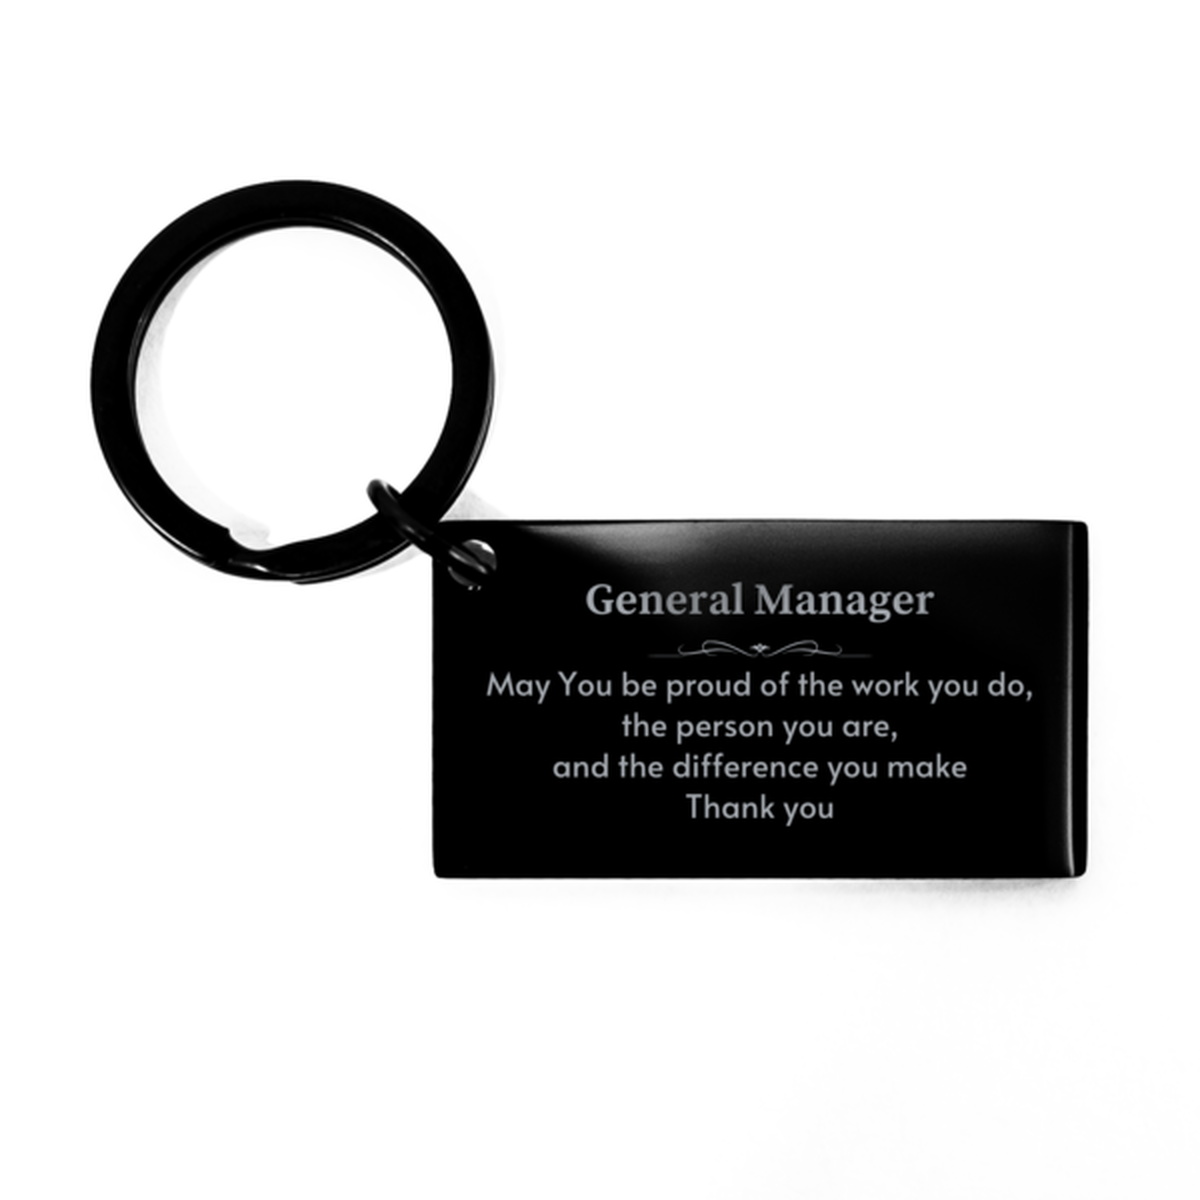 Heartwarming Keychain Retirement Coworkers Gifts for General Manager, Maintenance Worker May You be proud of the work you do, the person you are Gifts for Boss Men Women Friends